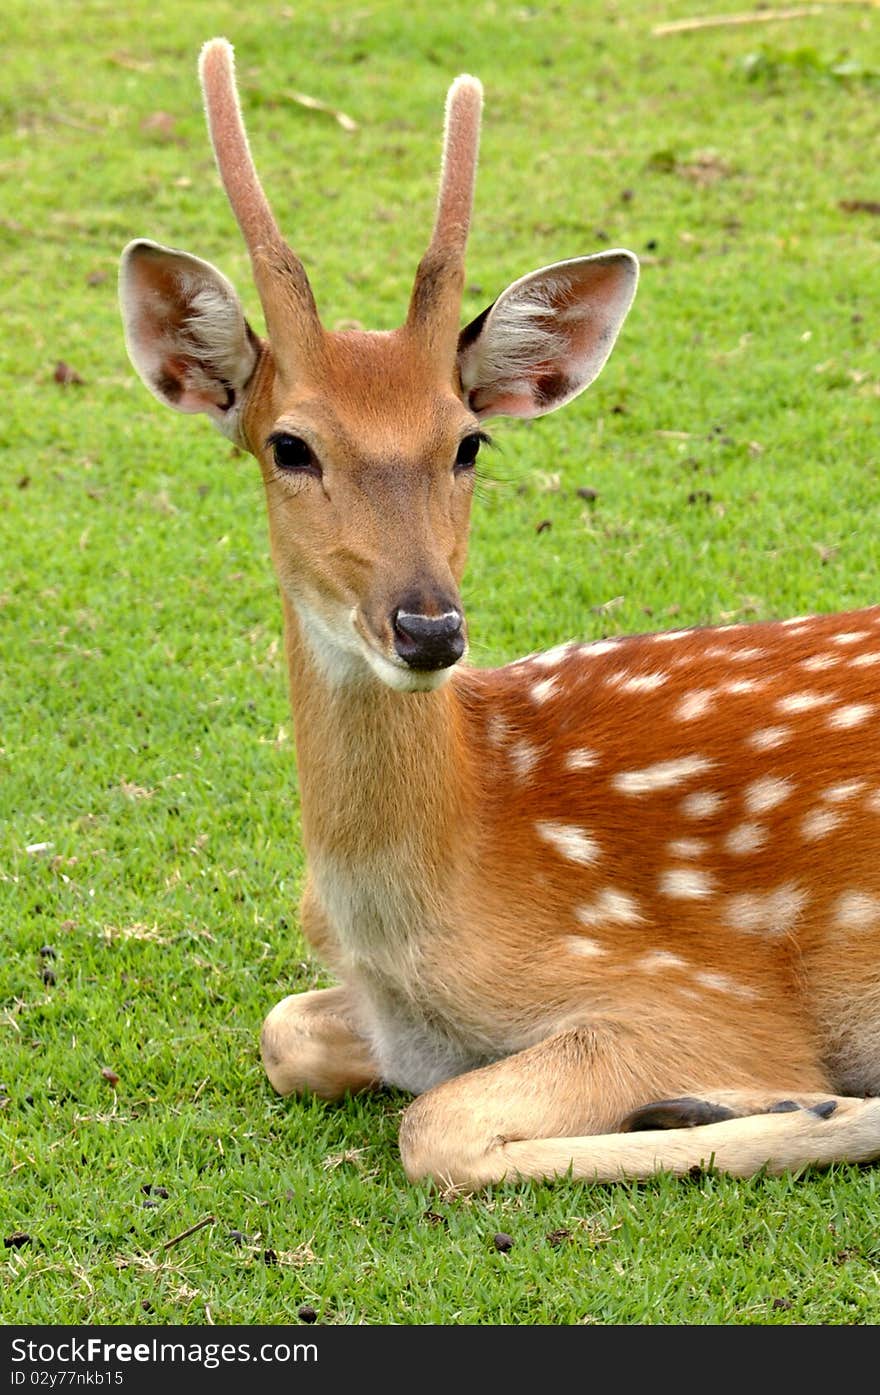 The Sika Deer, also known as the Spotted Deer or the Japanese Deer is a species of deer that is native to much of East Asia, and also introduced to various parts of the world. The Sika Deer, also known as the Spotted Deer or the Japanese Deer is a species of deer that is native to much of East Asia, and also introduced to various parts of the world.